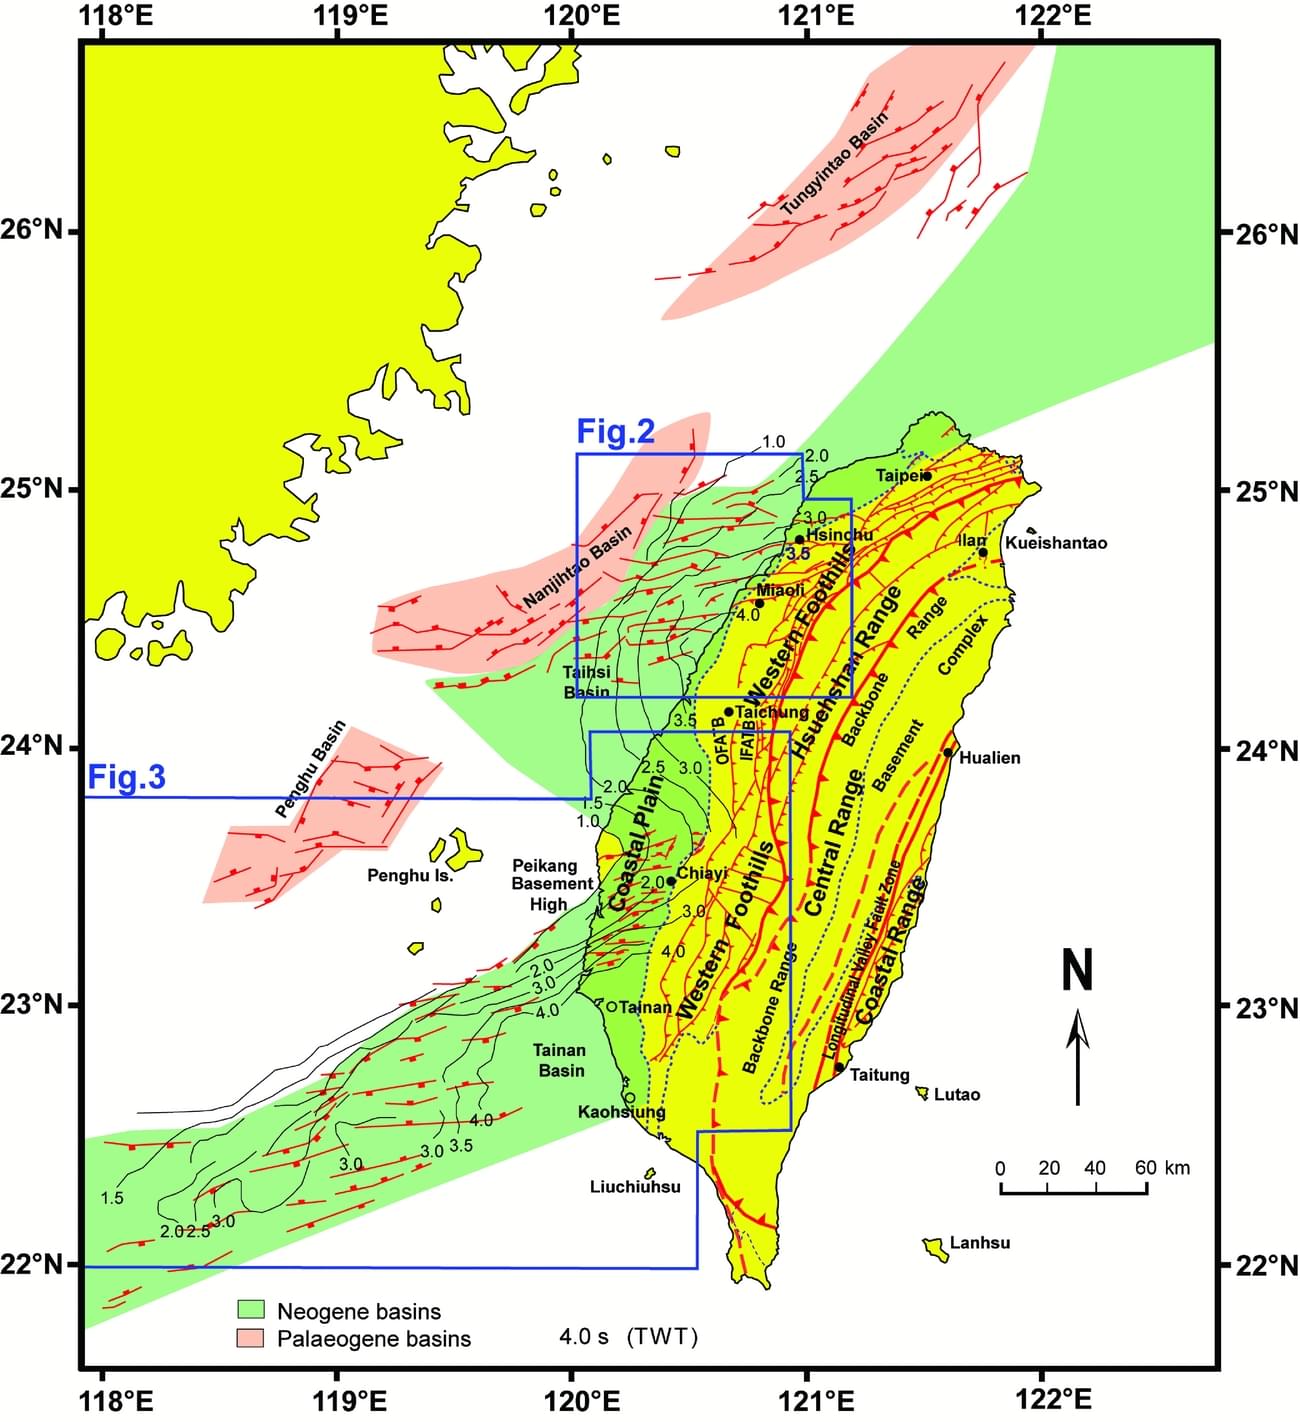 The Role Of Basement Involved Normal Faults In The Recent Tectonics Of Western Taiwan 